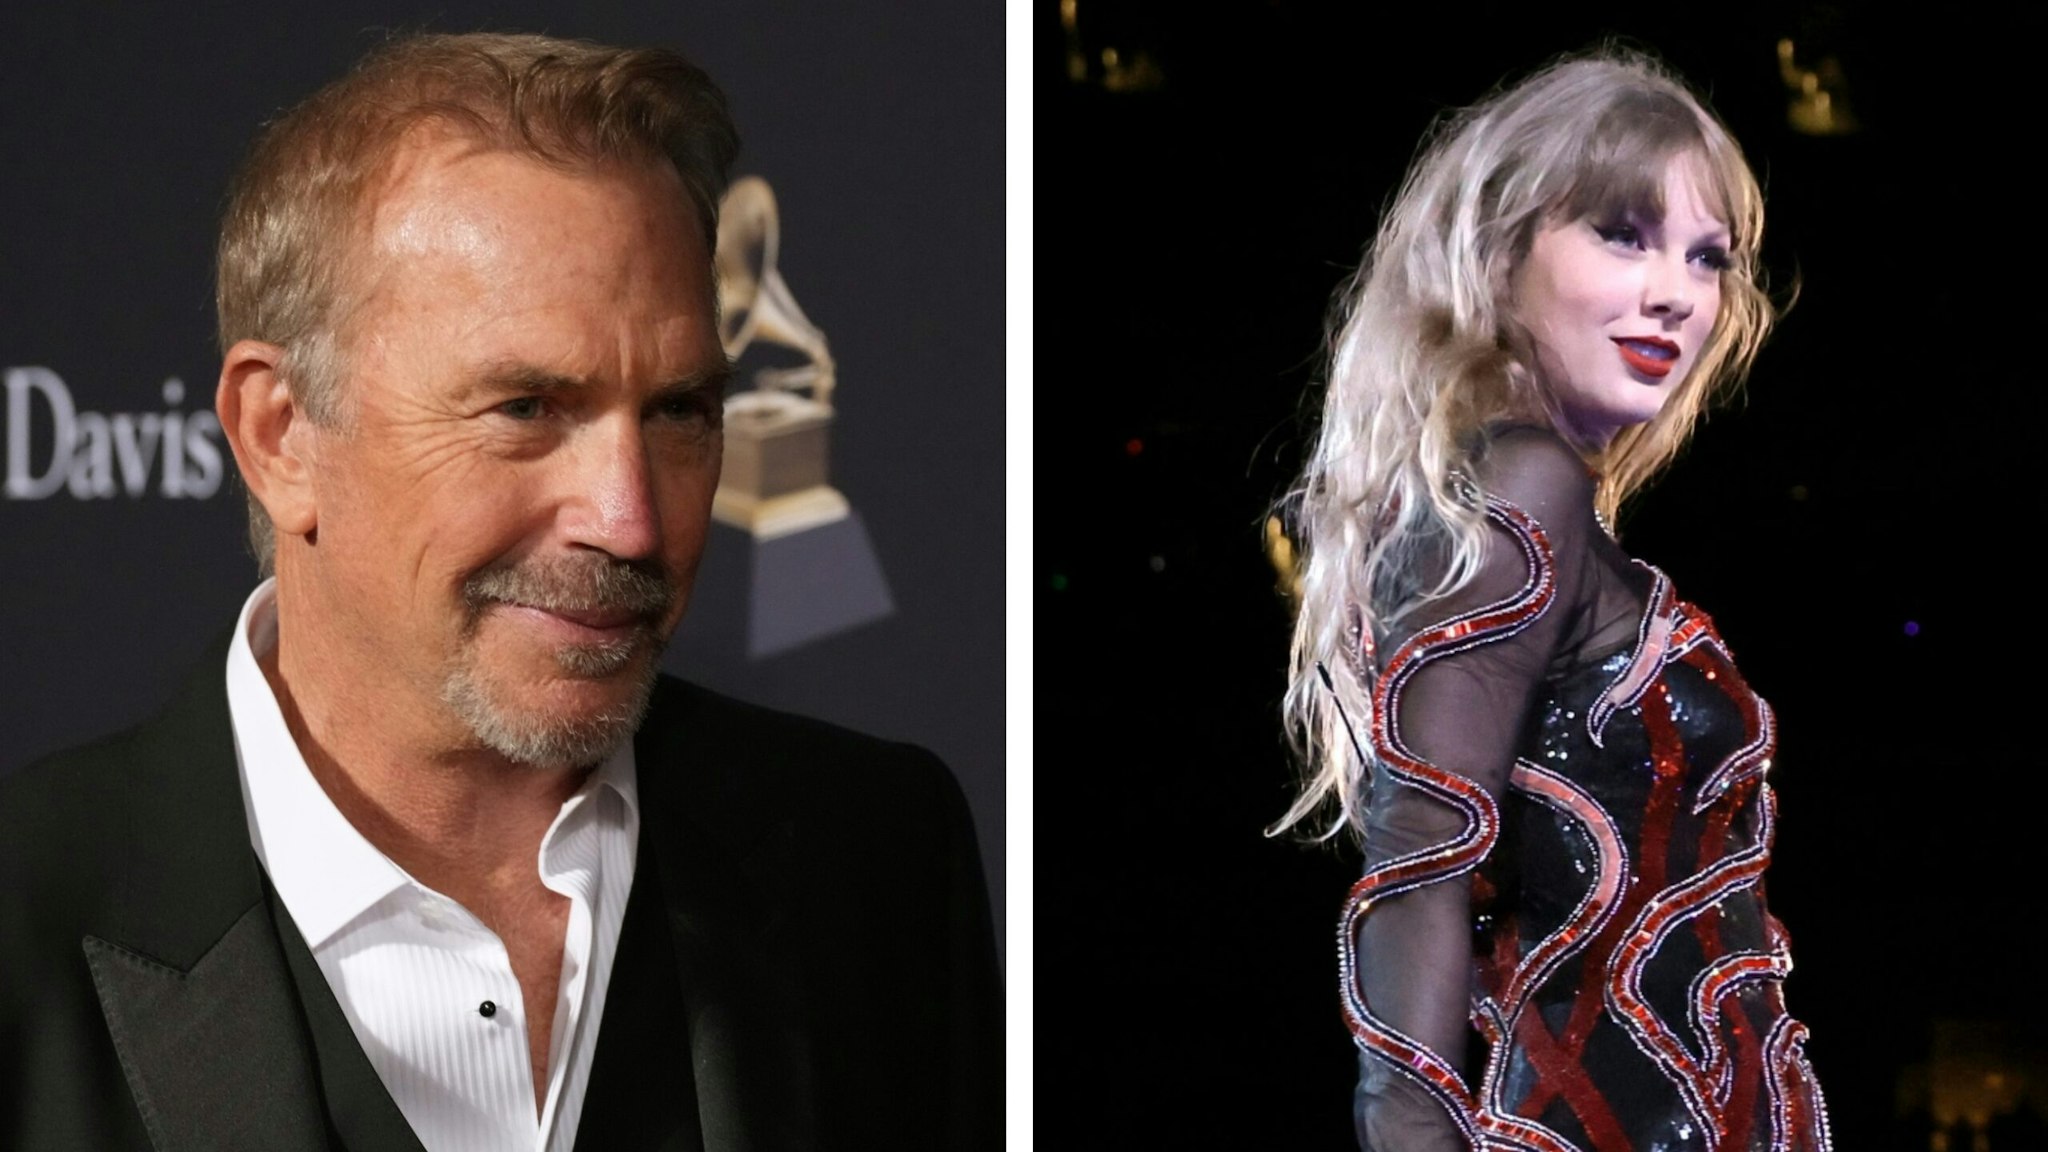 Costner and Swift